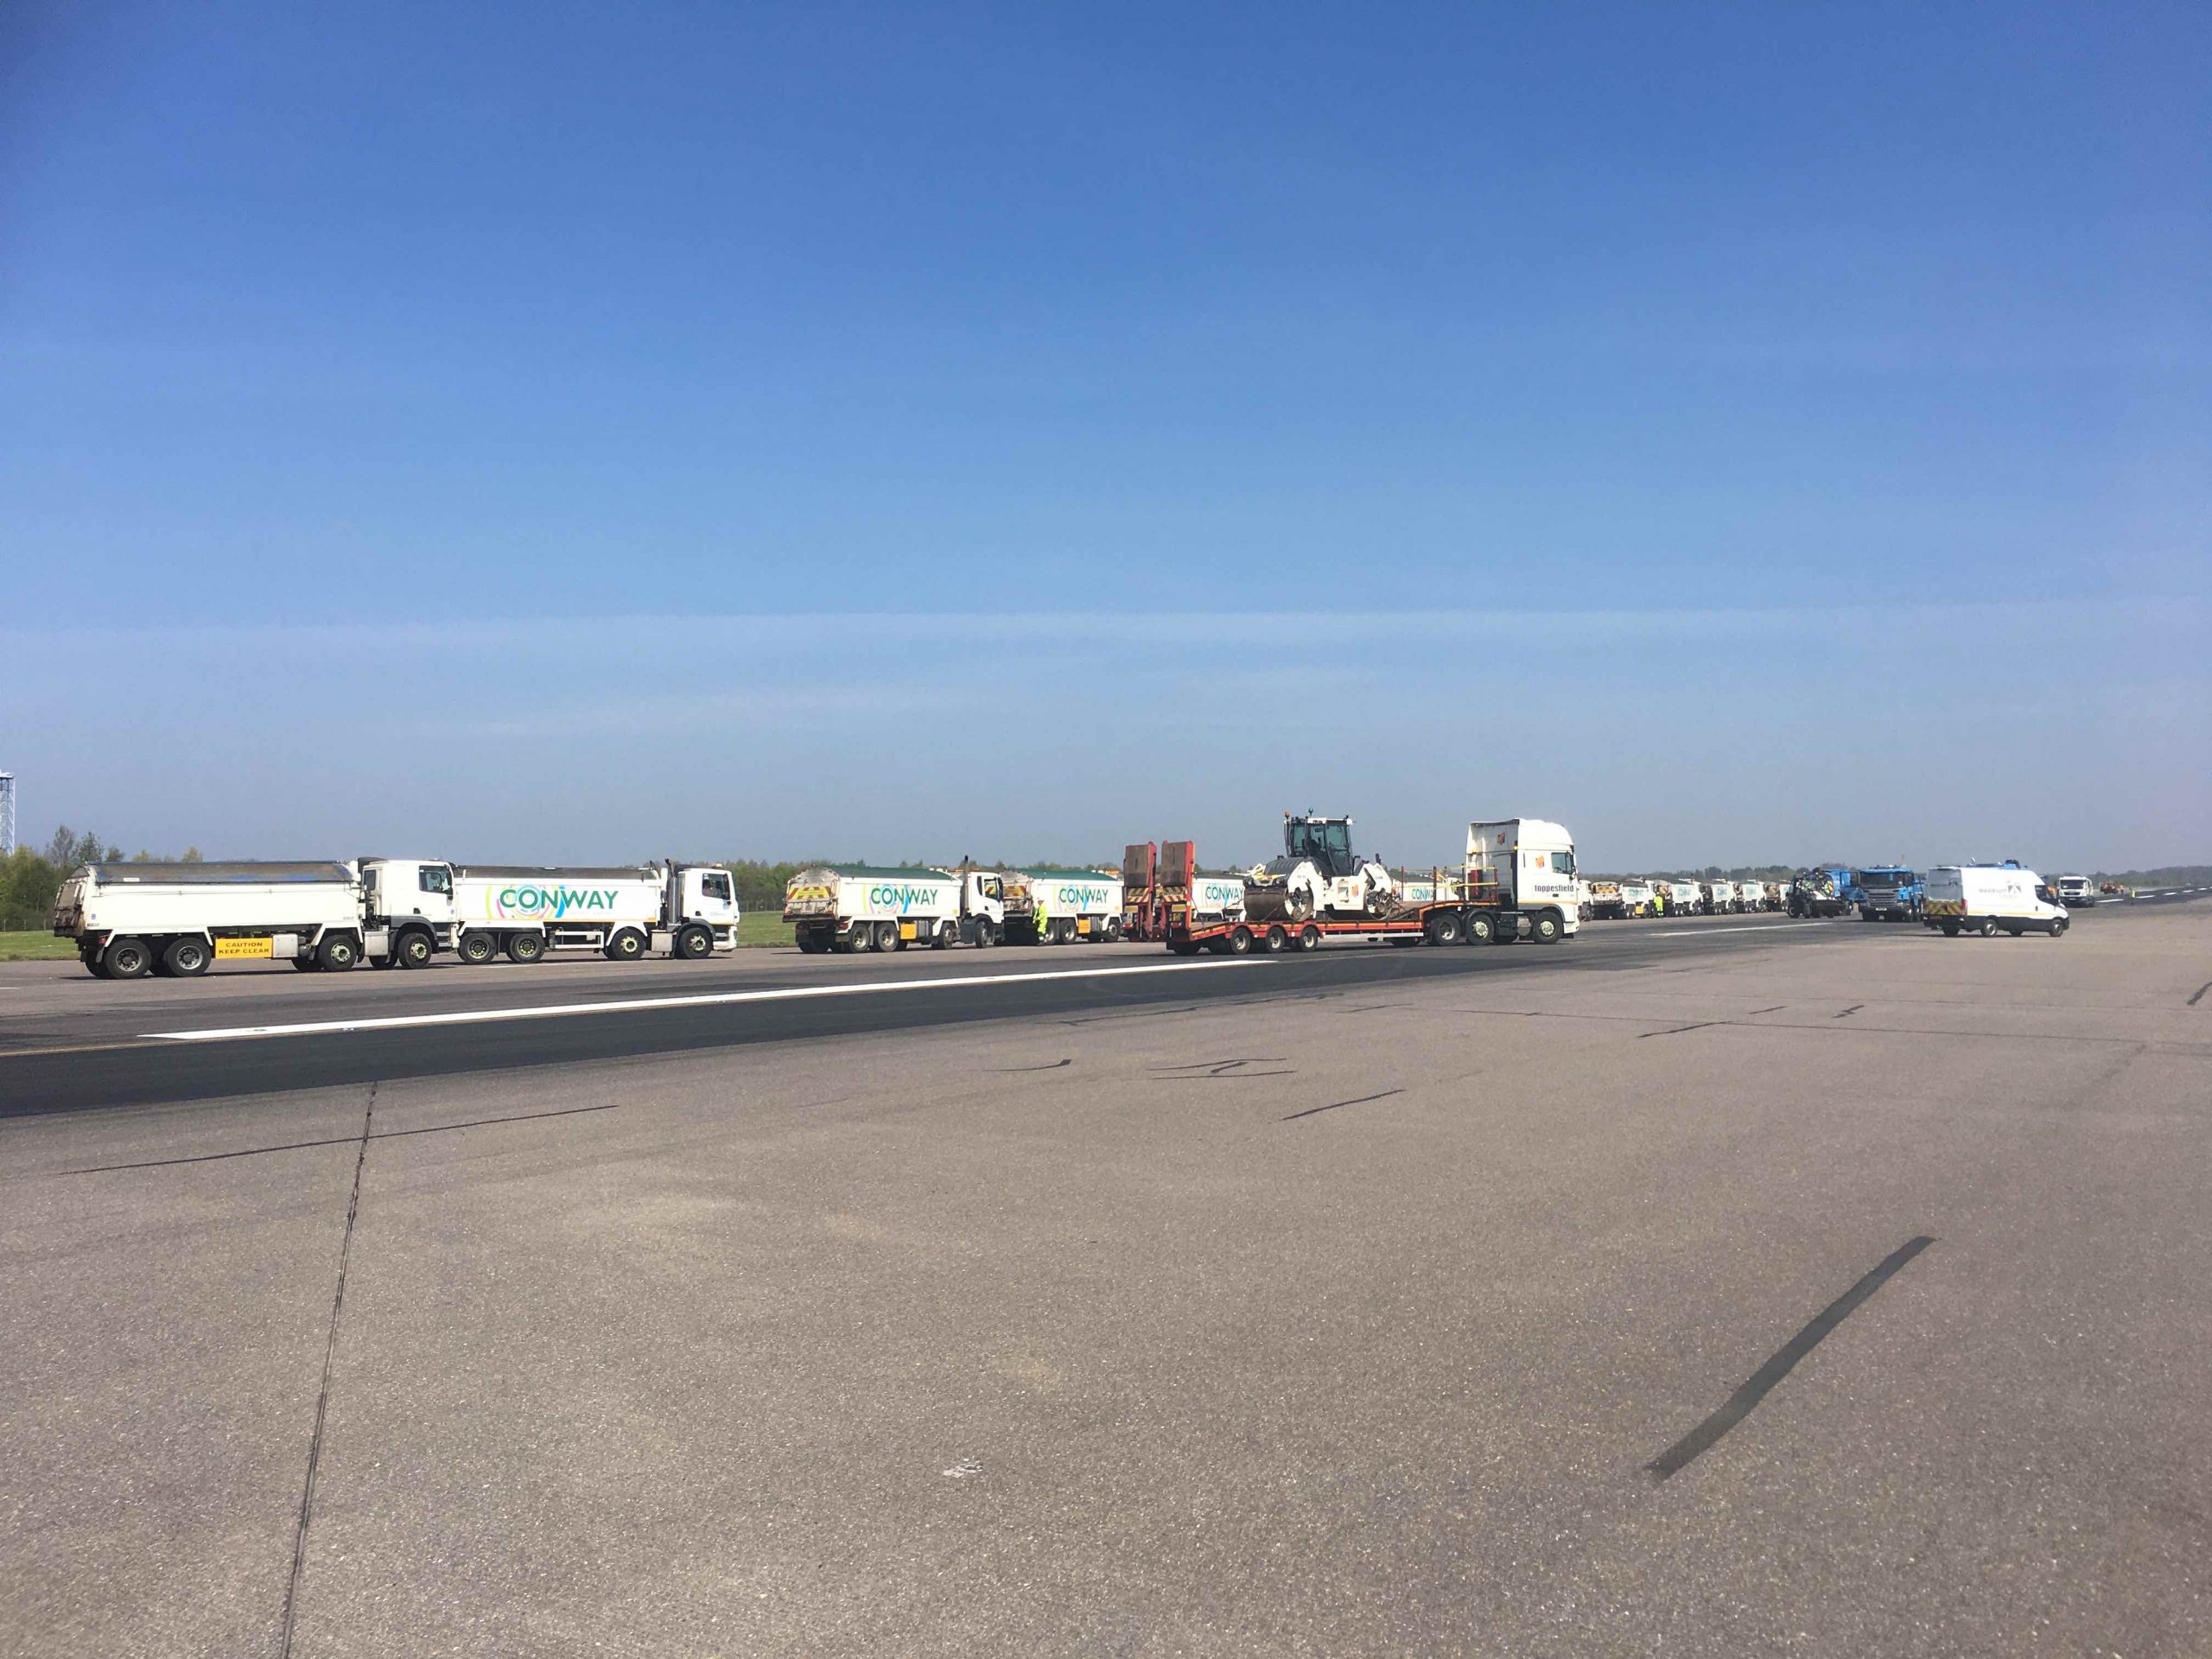 Runway works at Stansted as trucks replace take-offs